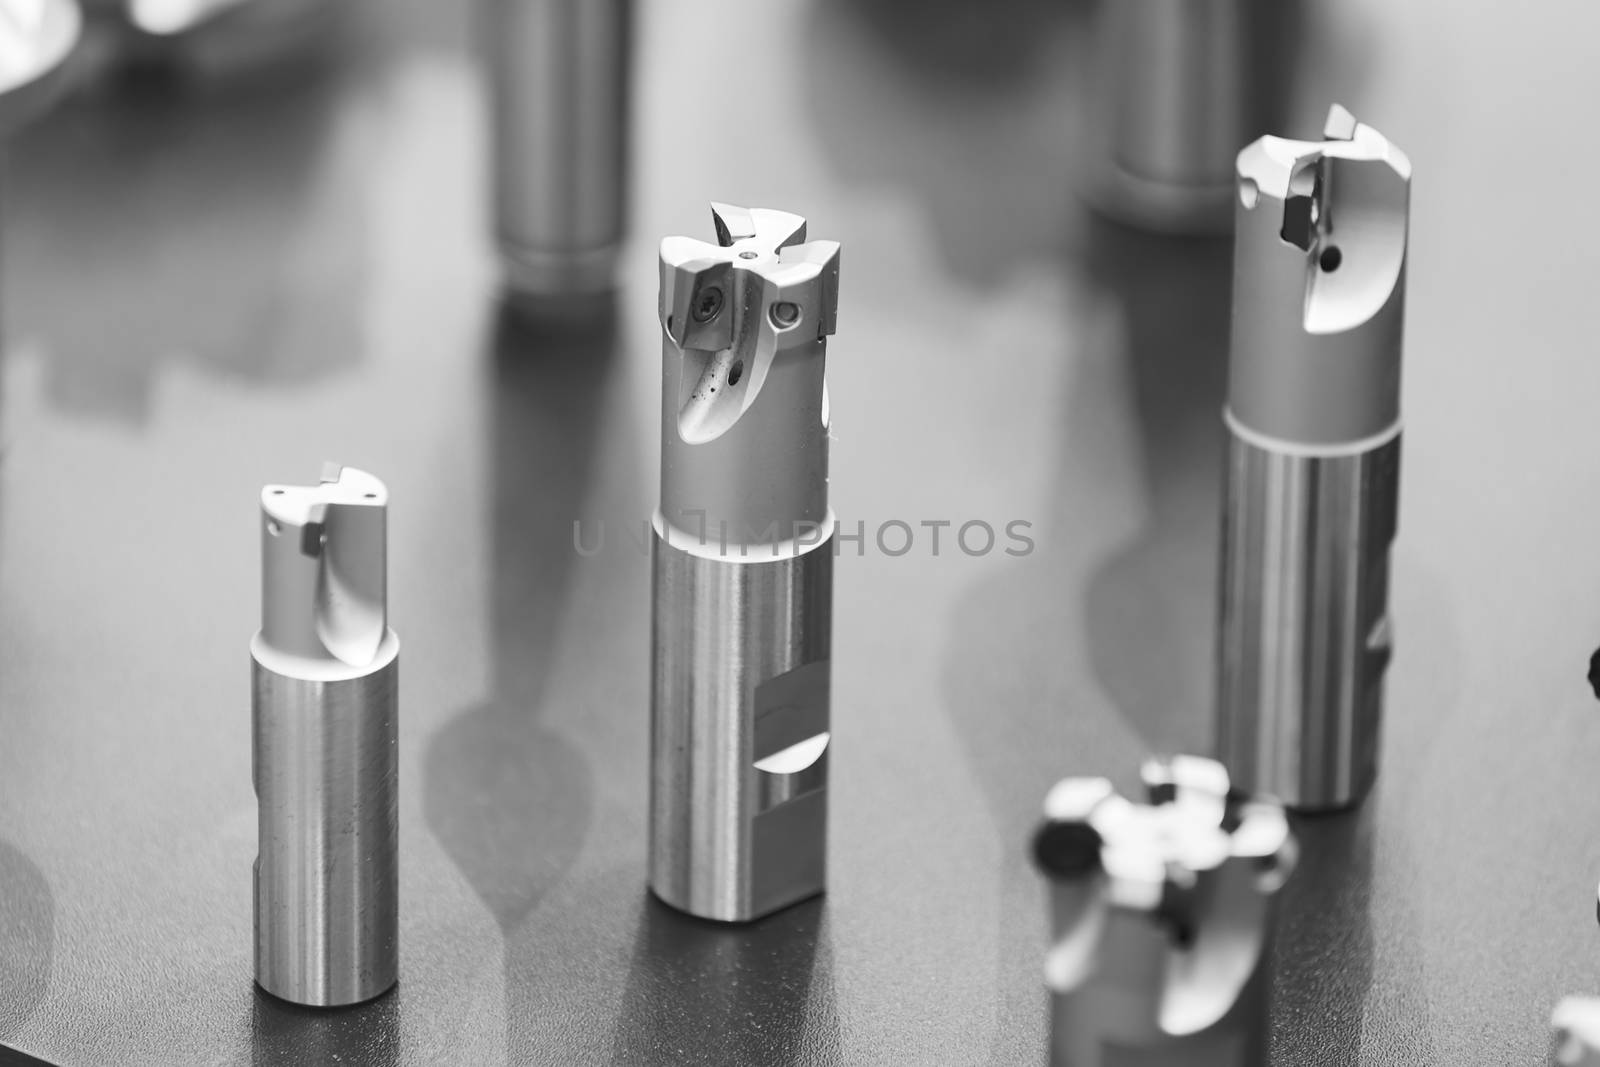 Various parts for lathe tools, note shallow depth of field